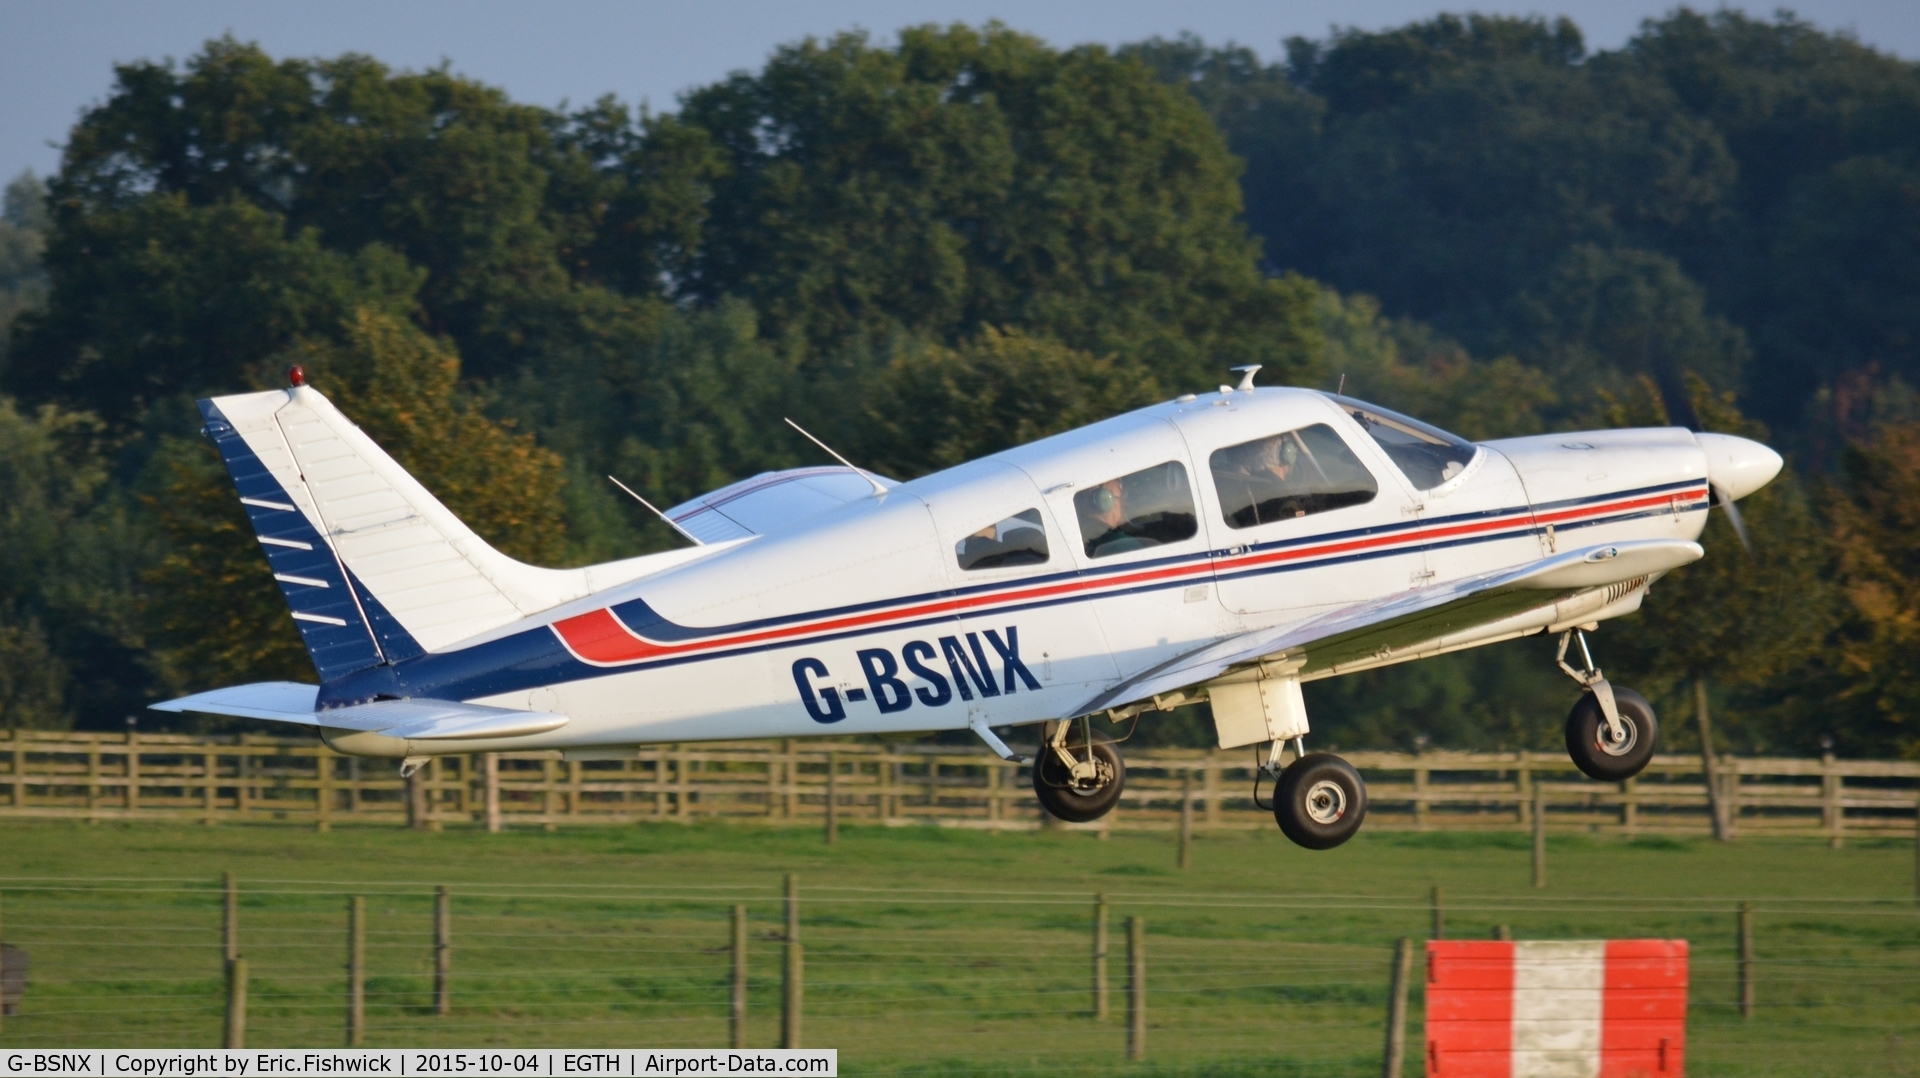 G-BSNX, 1979 Piper PA-28-181 Cherokee Archer II C/N 28-7990311, 42 G-BSNX departing The Shuttleworth 'Uncovered' Airshow (Finale,) Oct. 2015.